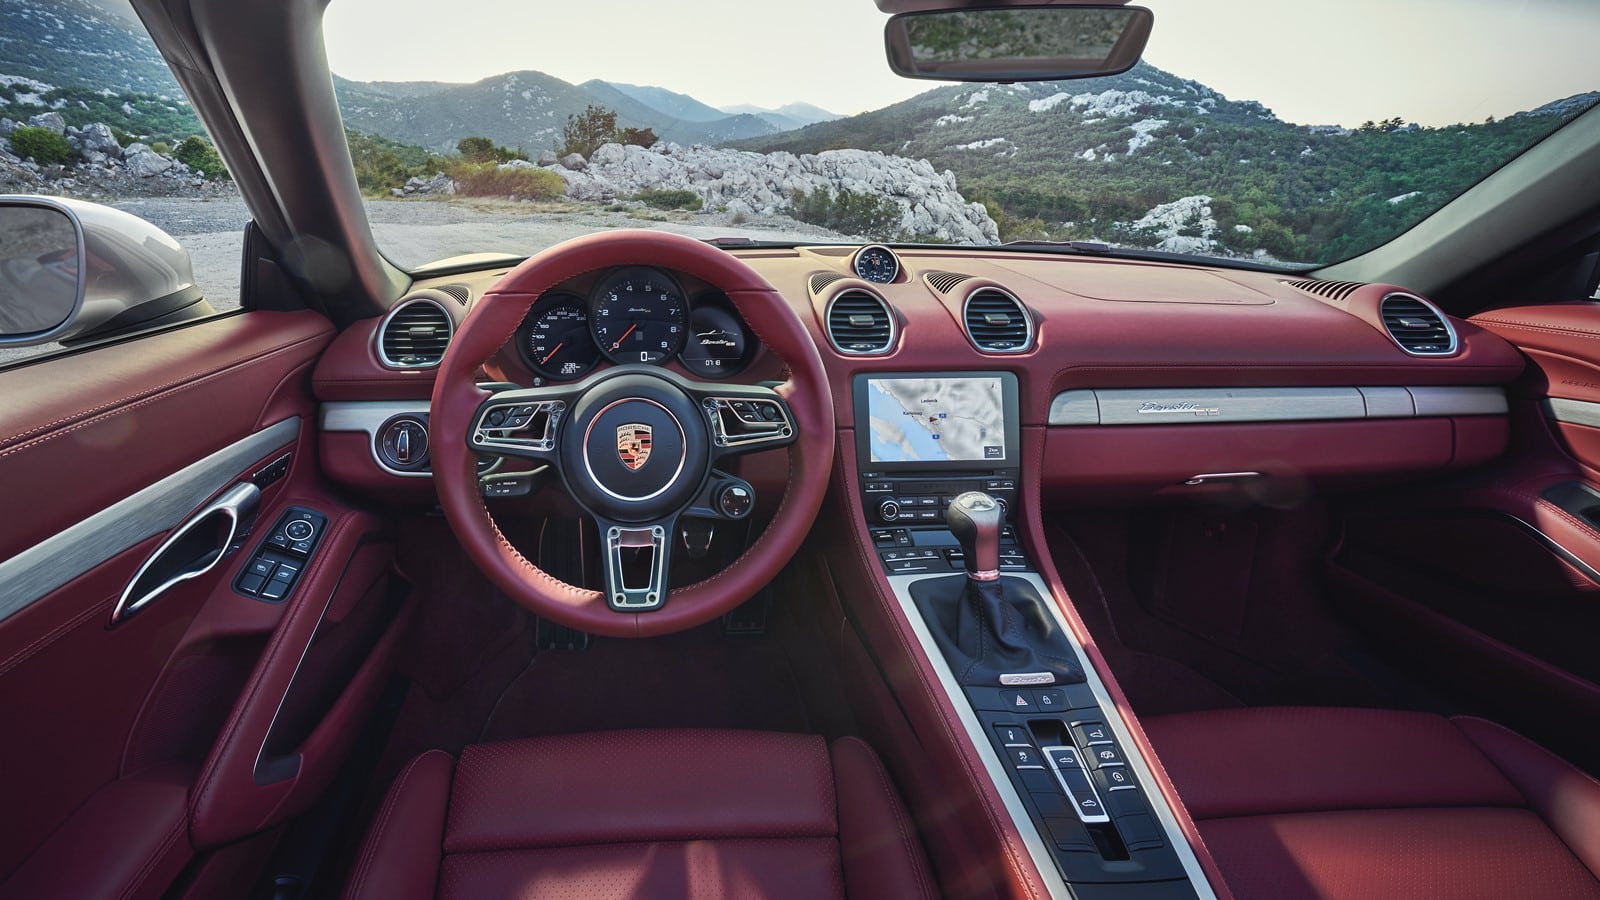 The Boxster turns 25 and Porsche celebrates it with a special edition